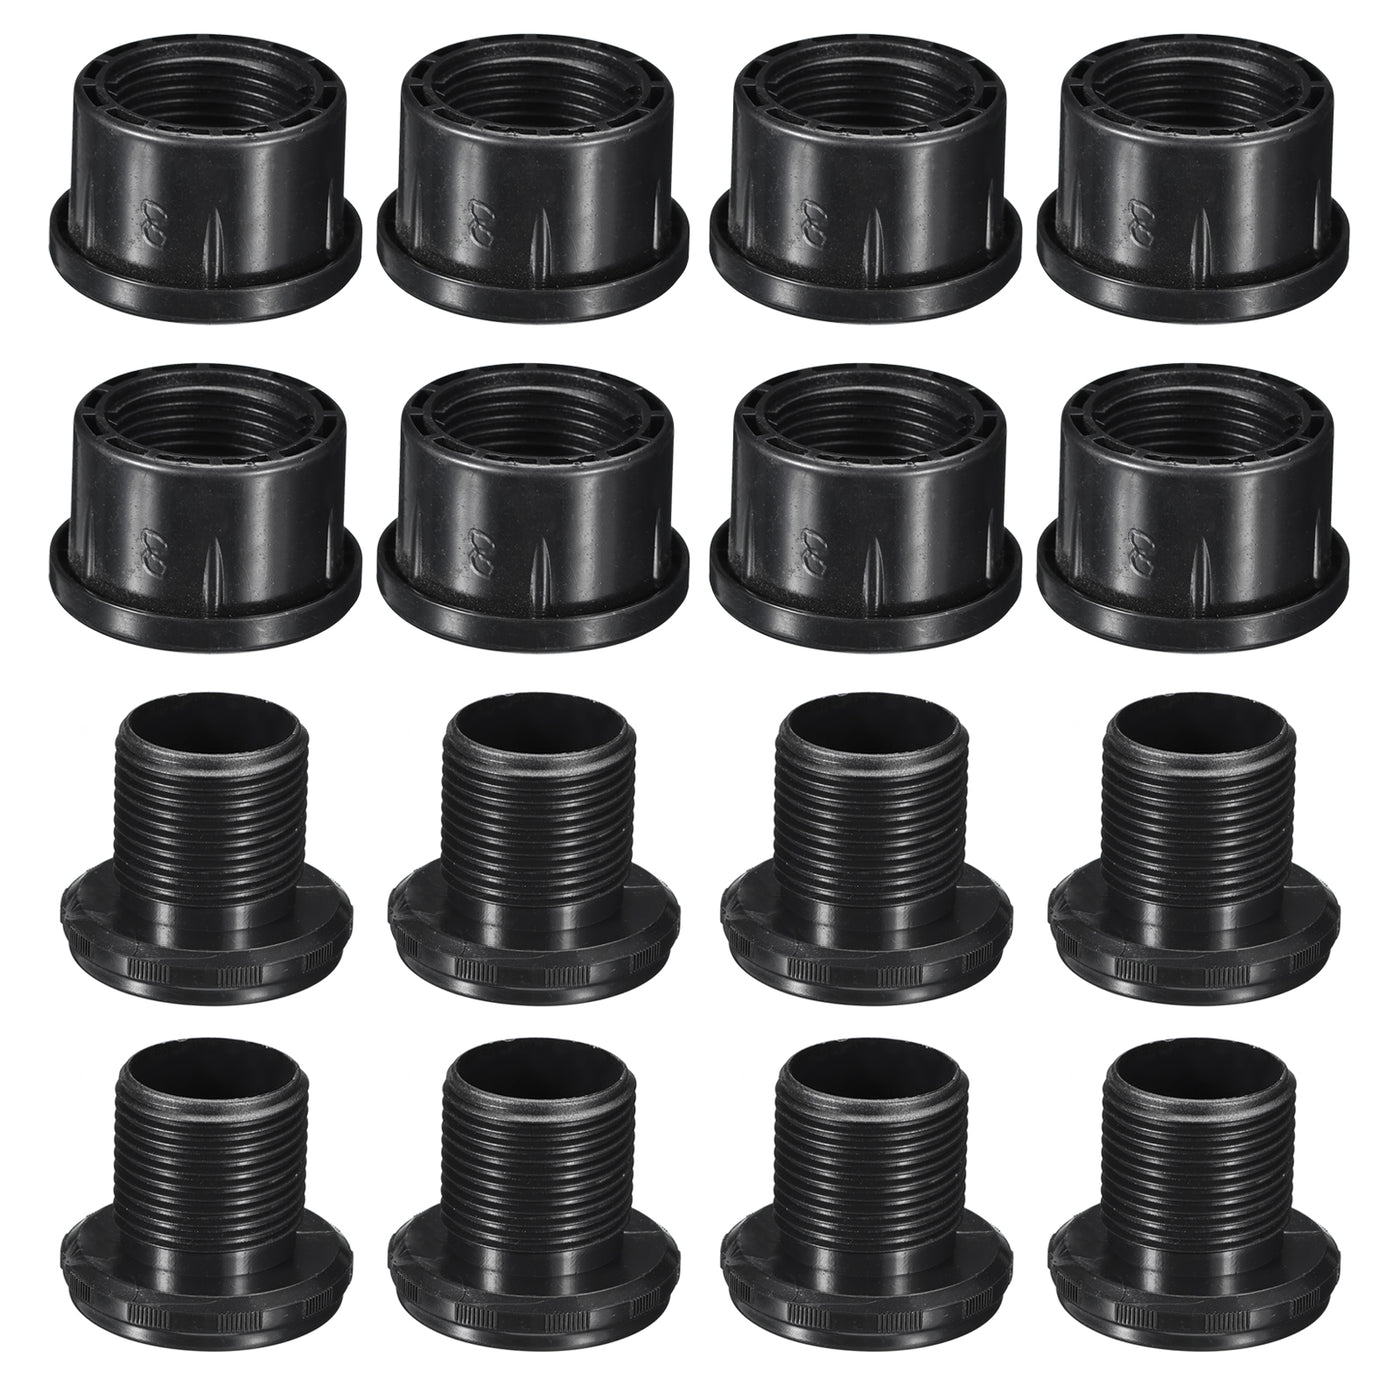 uxcell Uxcell 8Pcs Inserts for Round Tubes with Leveling Feet, for 50mm/1.97" Dia Round Tube